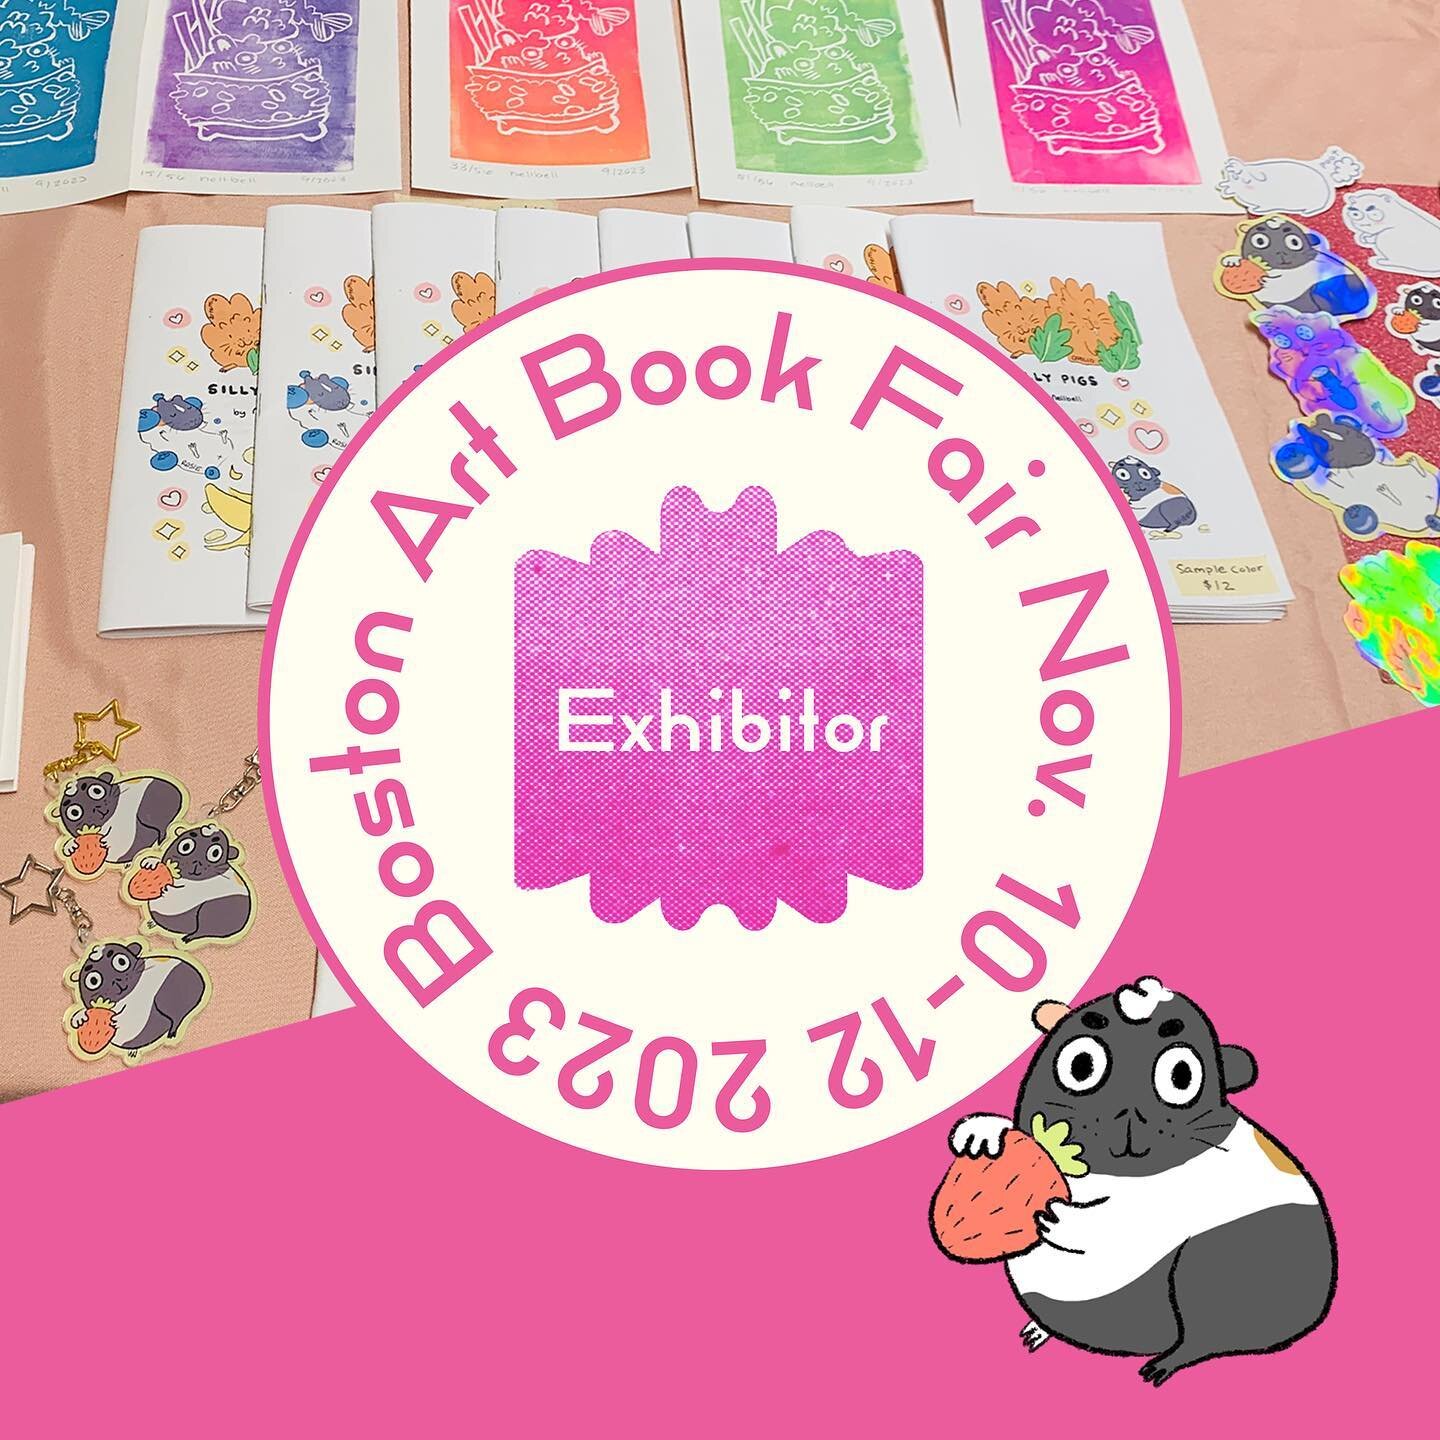 In 3 days! 🩷 I&rsquo;m coming back 🩷 to @bostonartbookfair with my comics, zines, stationary goods, prints, and (NEW) mini paintings! Say hi and check out all the cuteness. See all the awesome creatives!

Get a ticket to the Preview Party if you wa